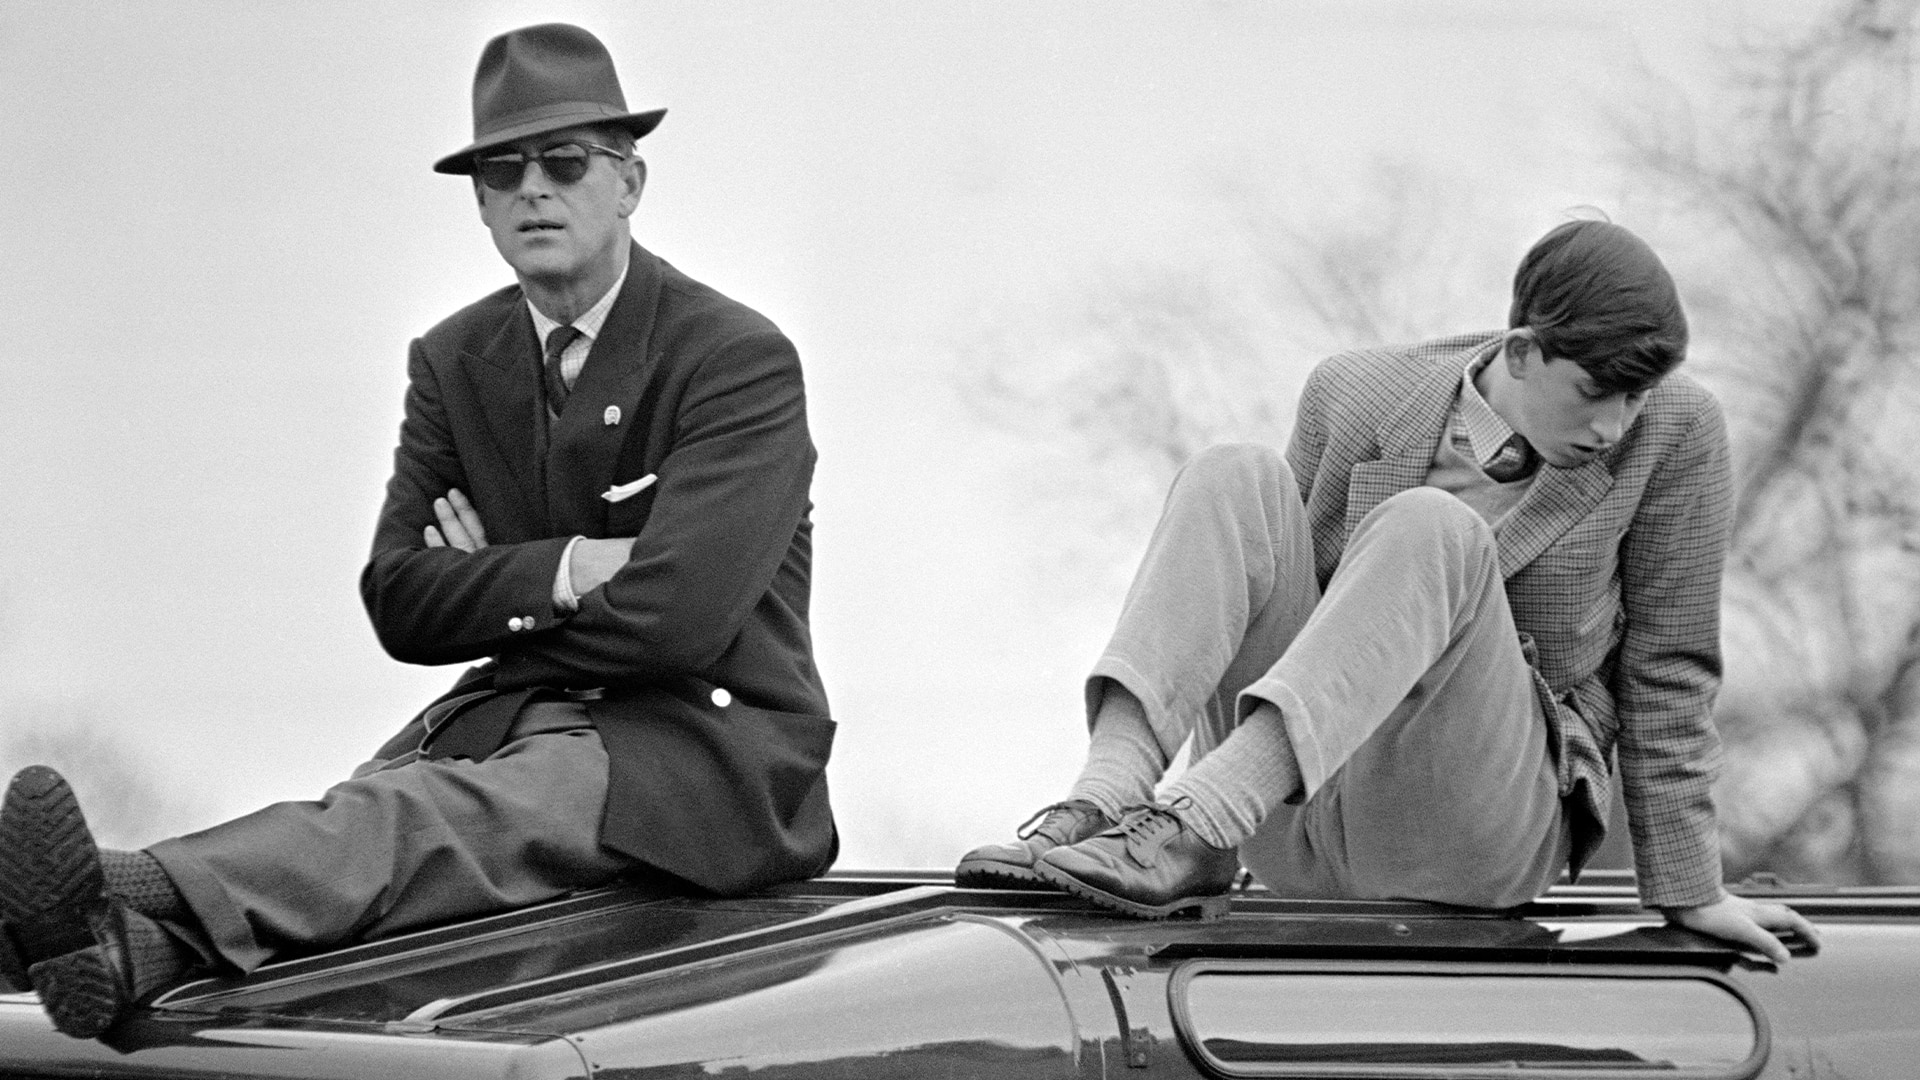 Prince Philip: A Tribute To A Style Icon | The Journal | MR PORTER